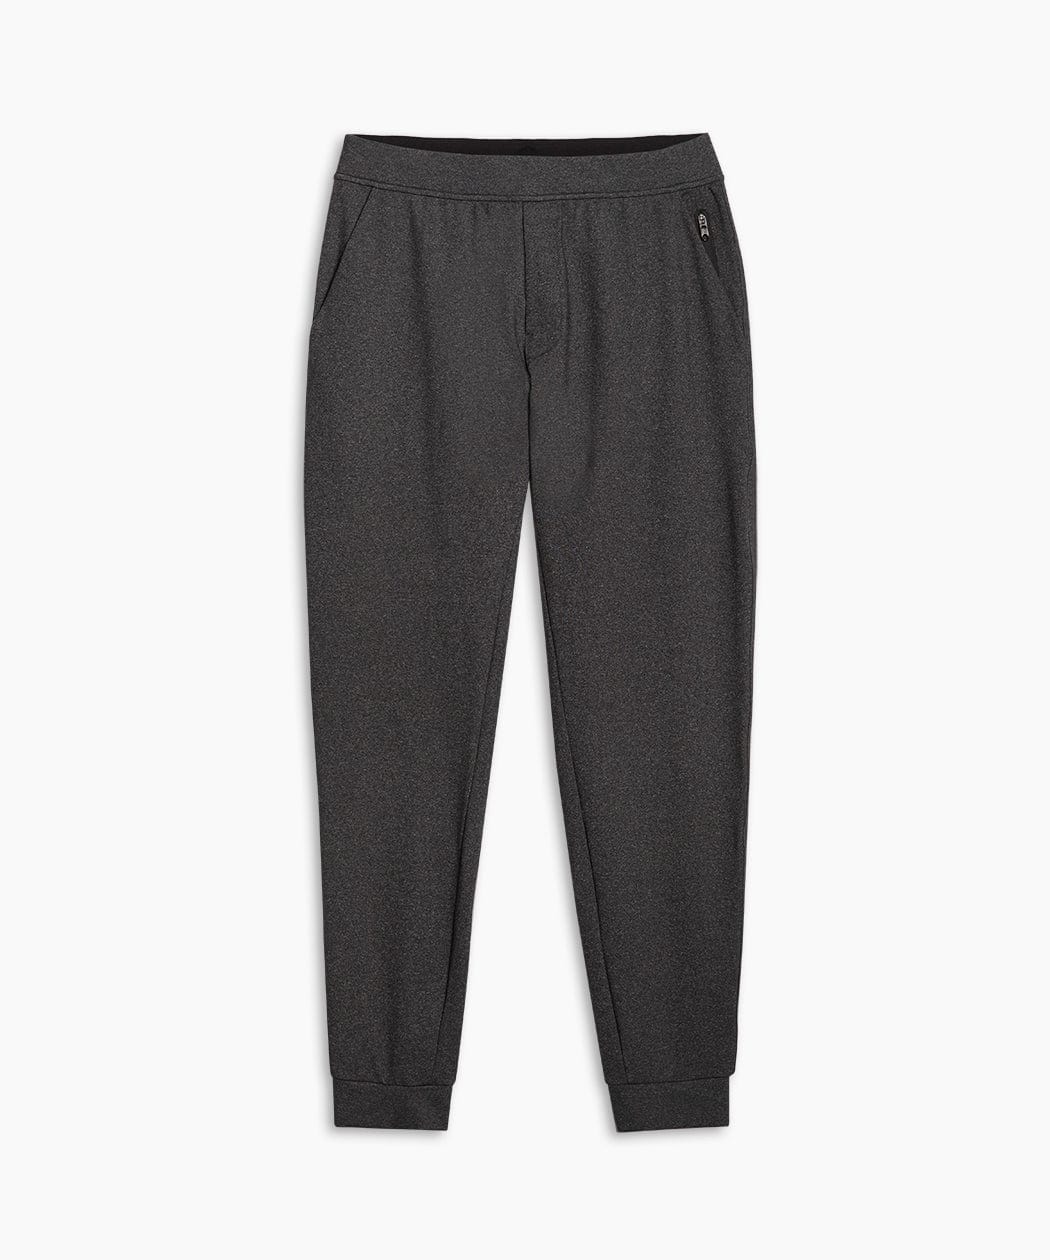 Public Rec All Day Every Day Joggers Review: Perfectly-Fitted Joggers